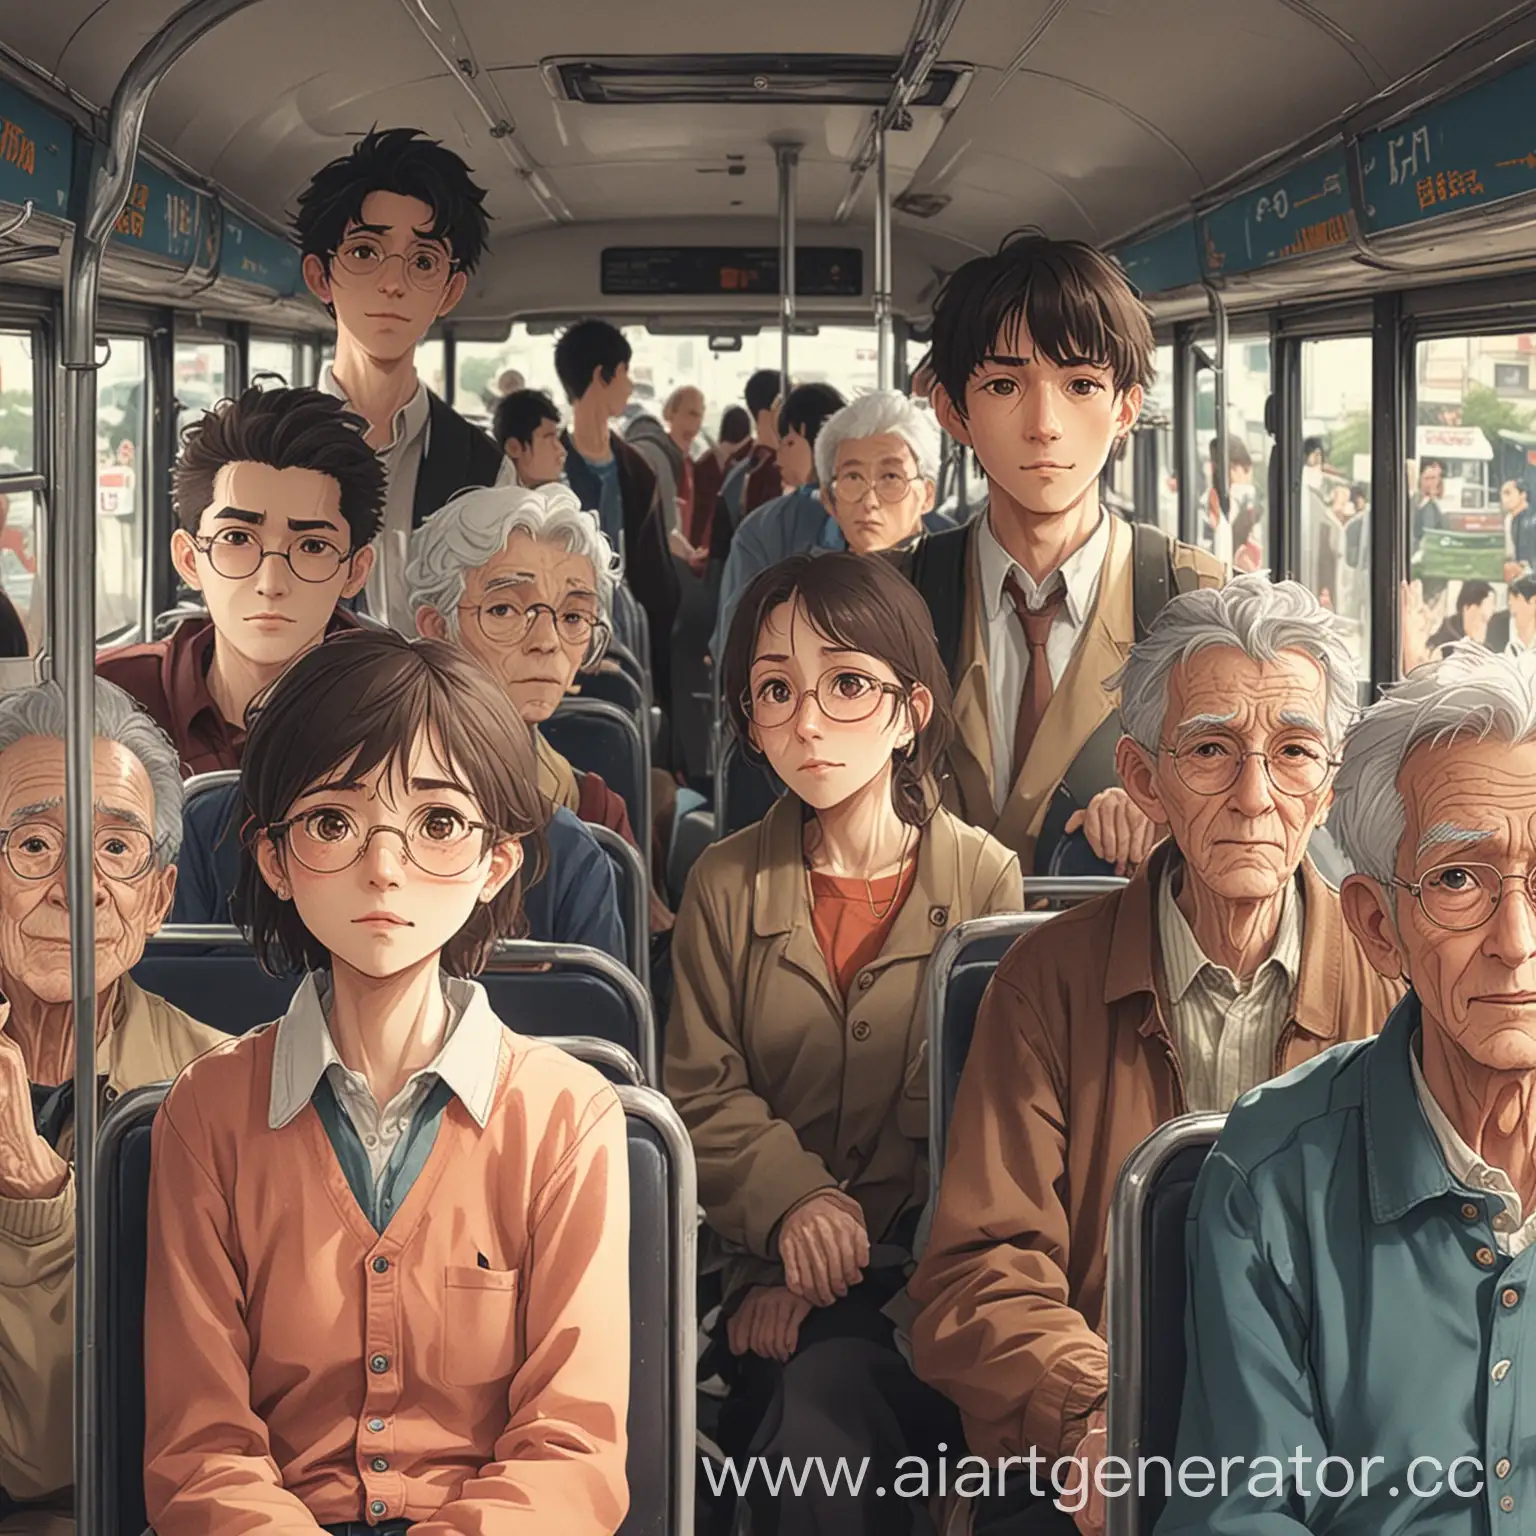 Anime-Style-Young-Man-on-a-Bus-with-Elderly-Passengers